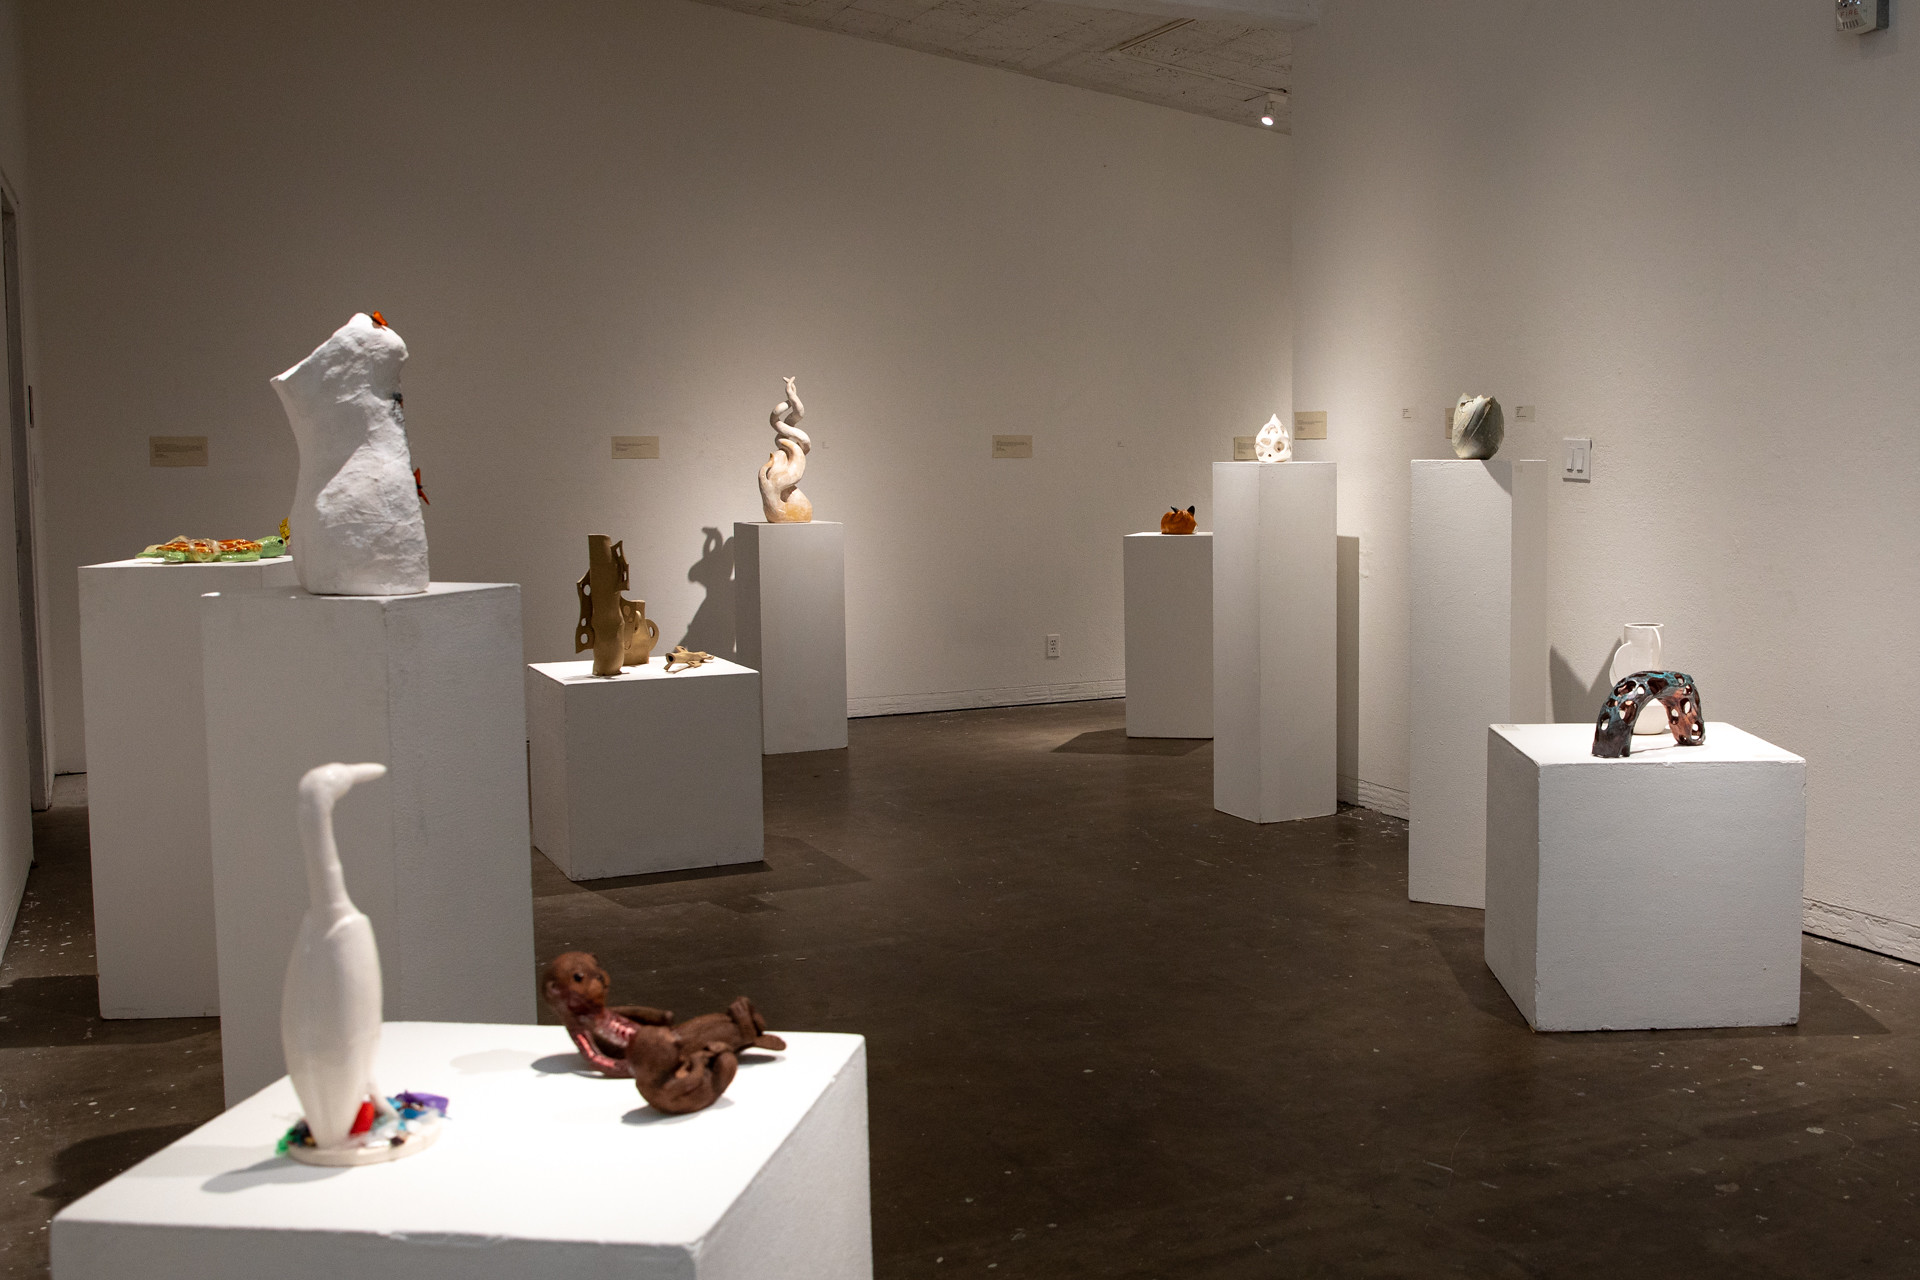 An art exhibition on display at the Robert Else gallery.